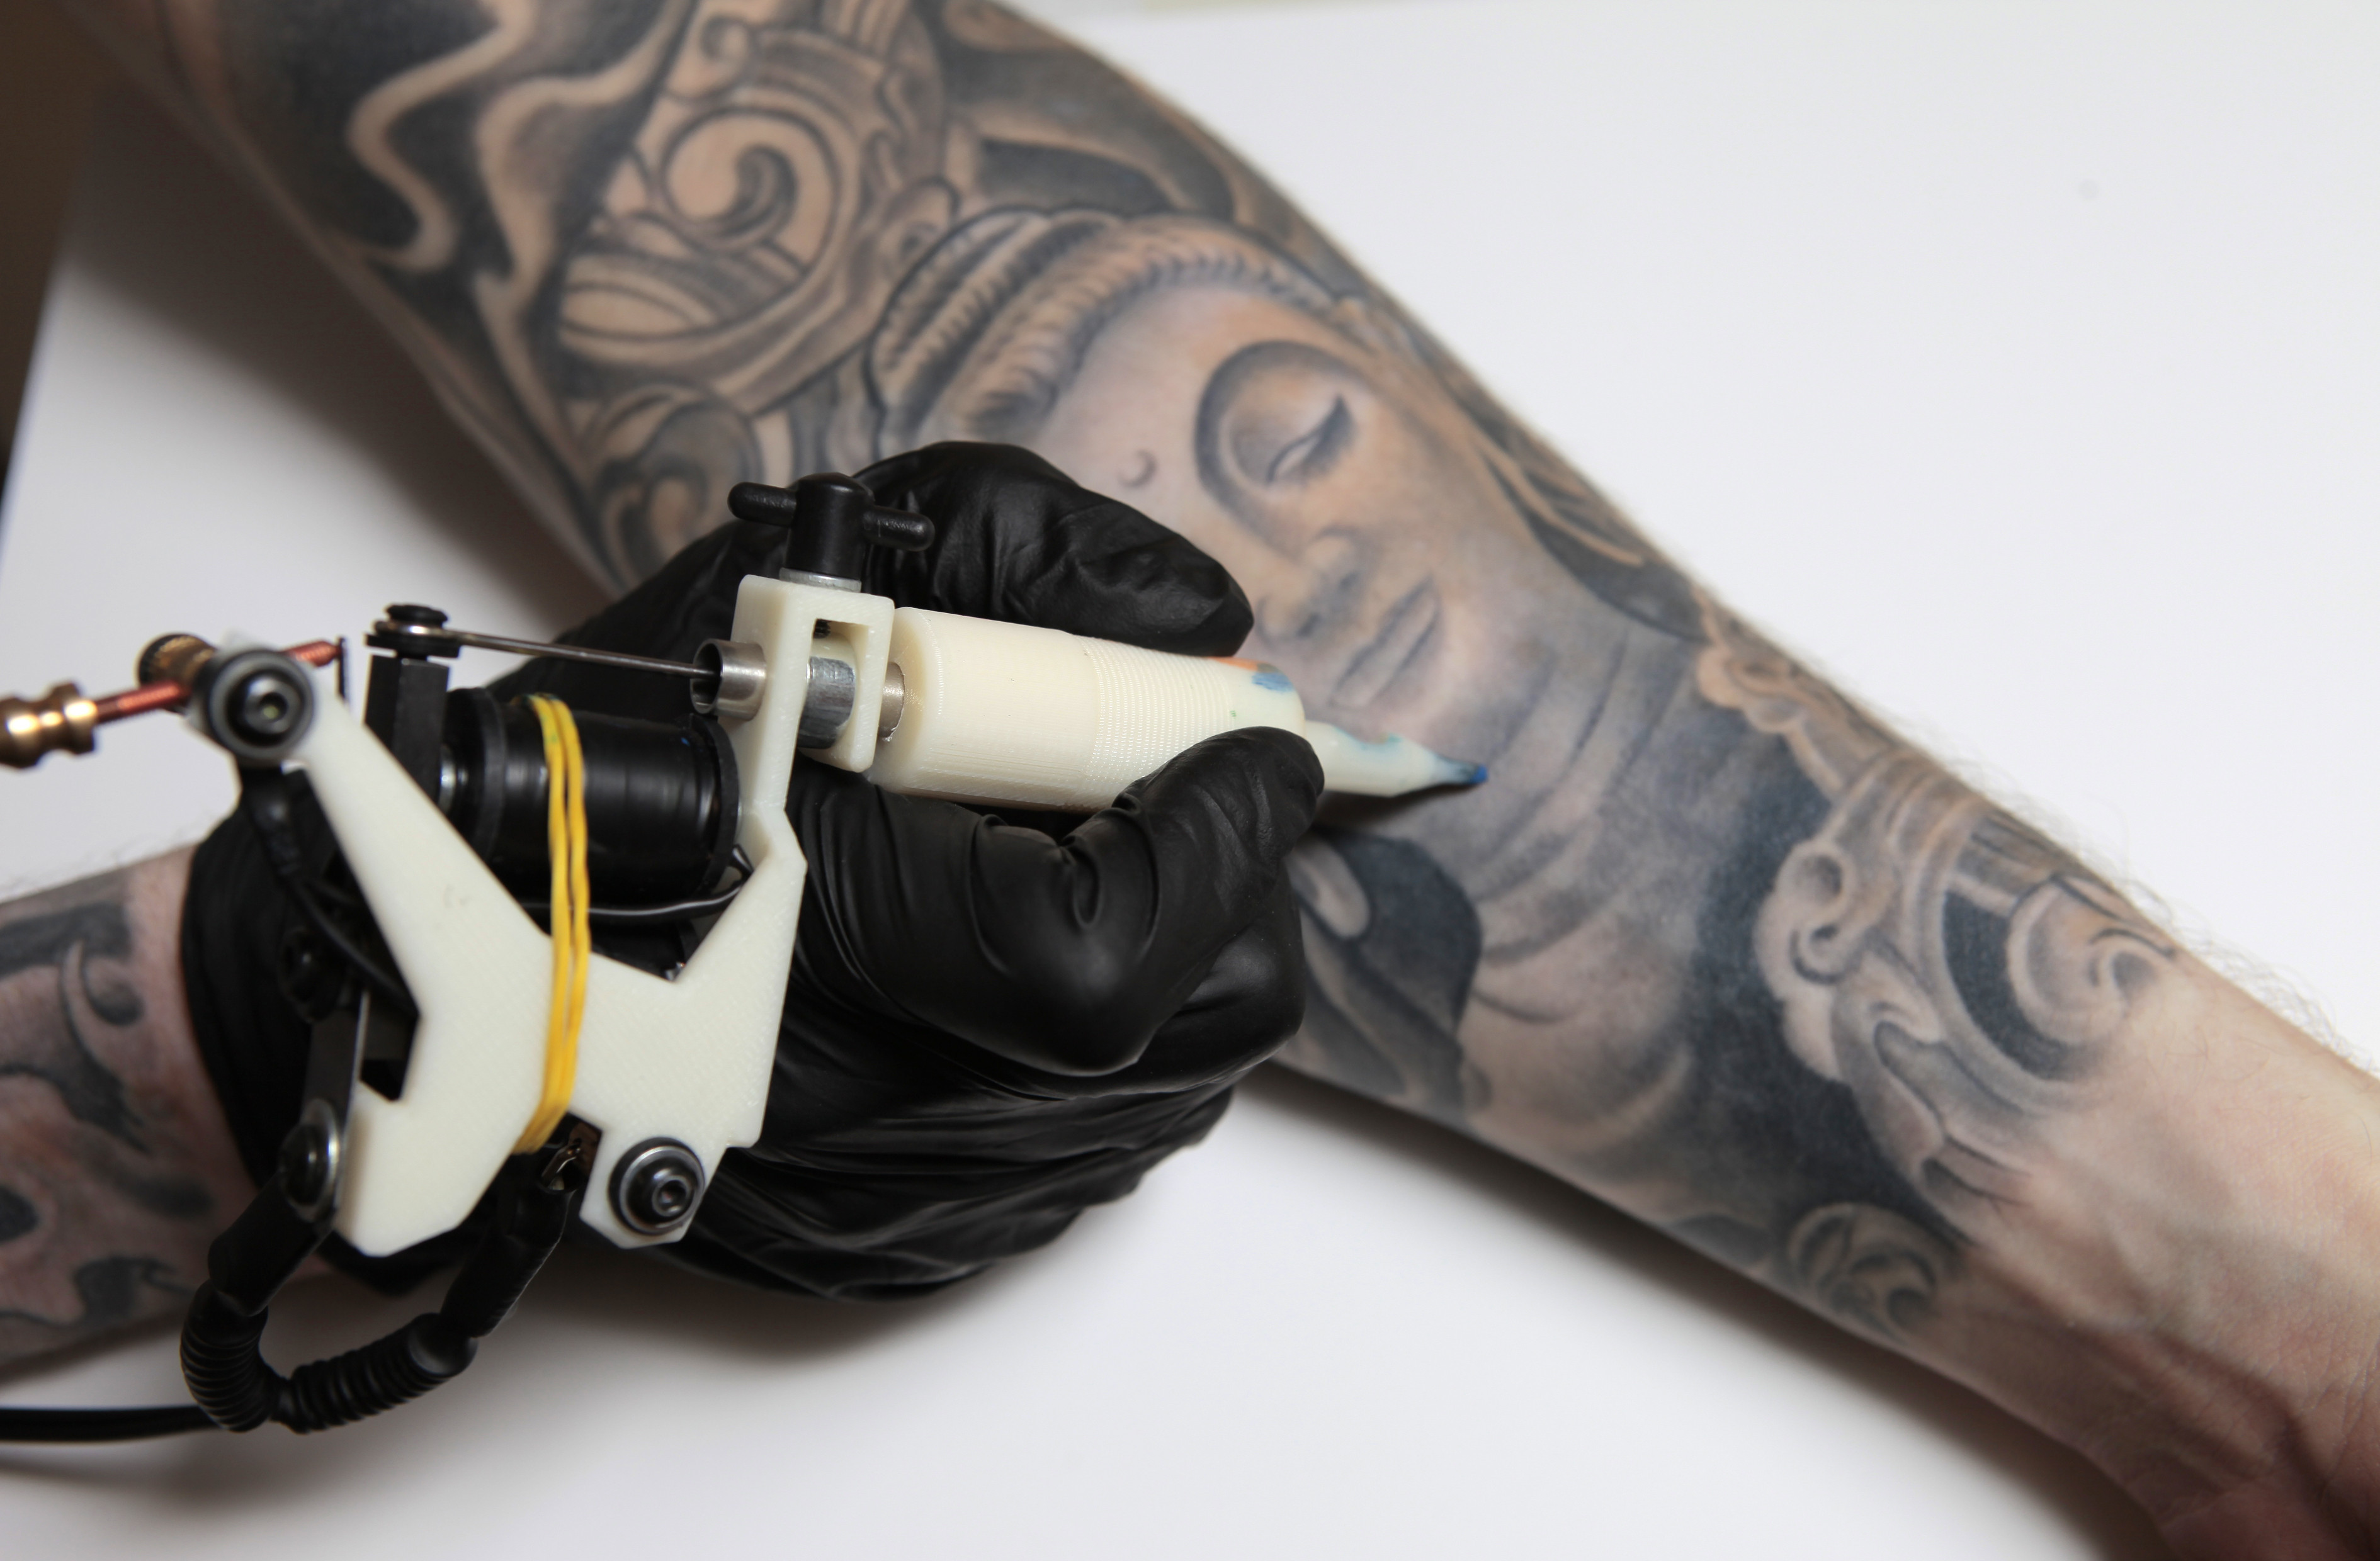 3D Printed Tattoo Machine - CAD / Show and tell - Talk Manufacturing | Hubs